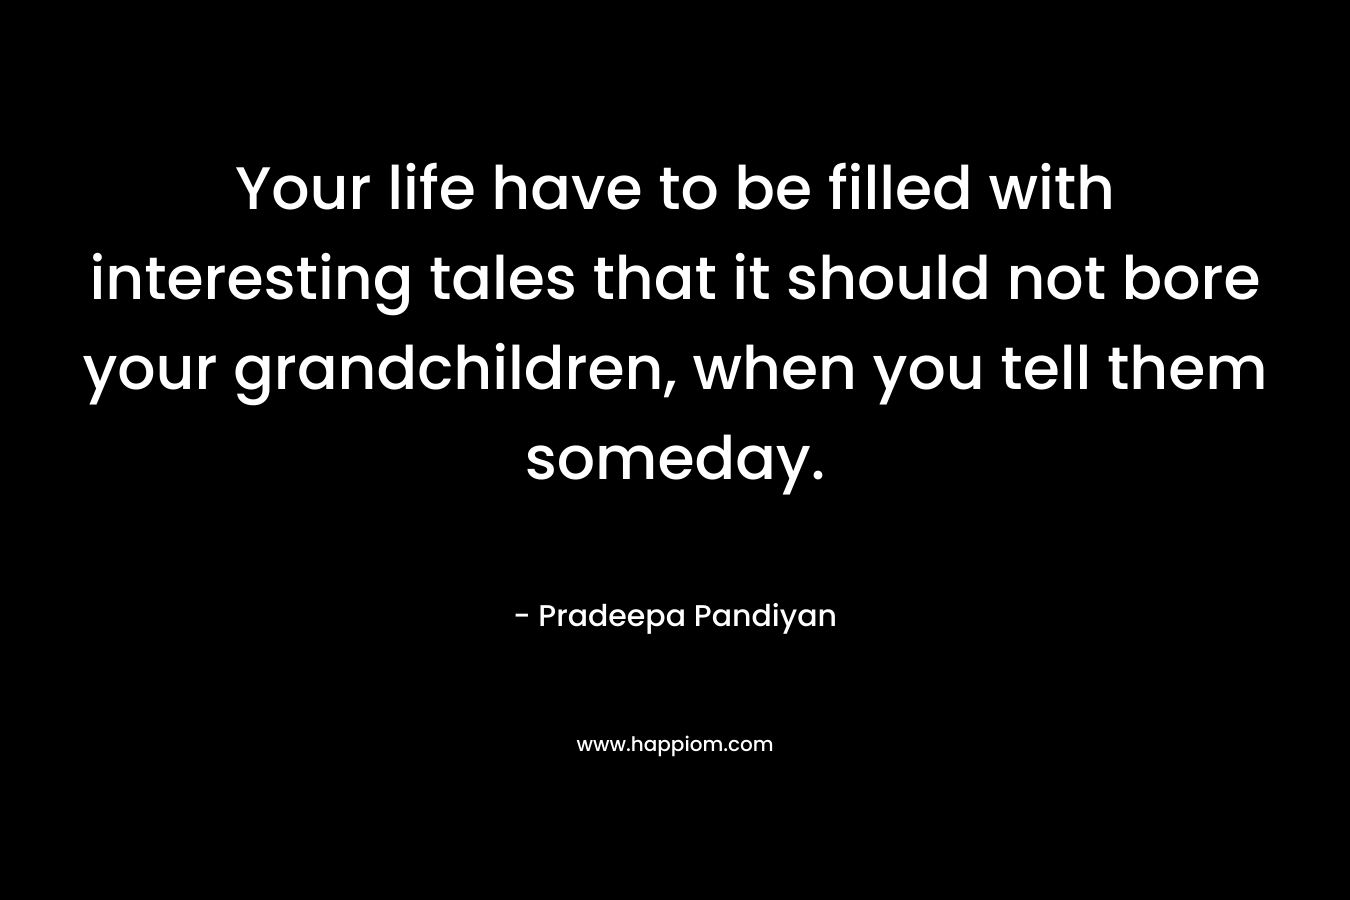 Your life have to be filled with interesting tales that it should not bore your grandchildren, when you tell them someday.